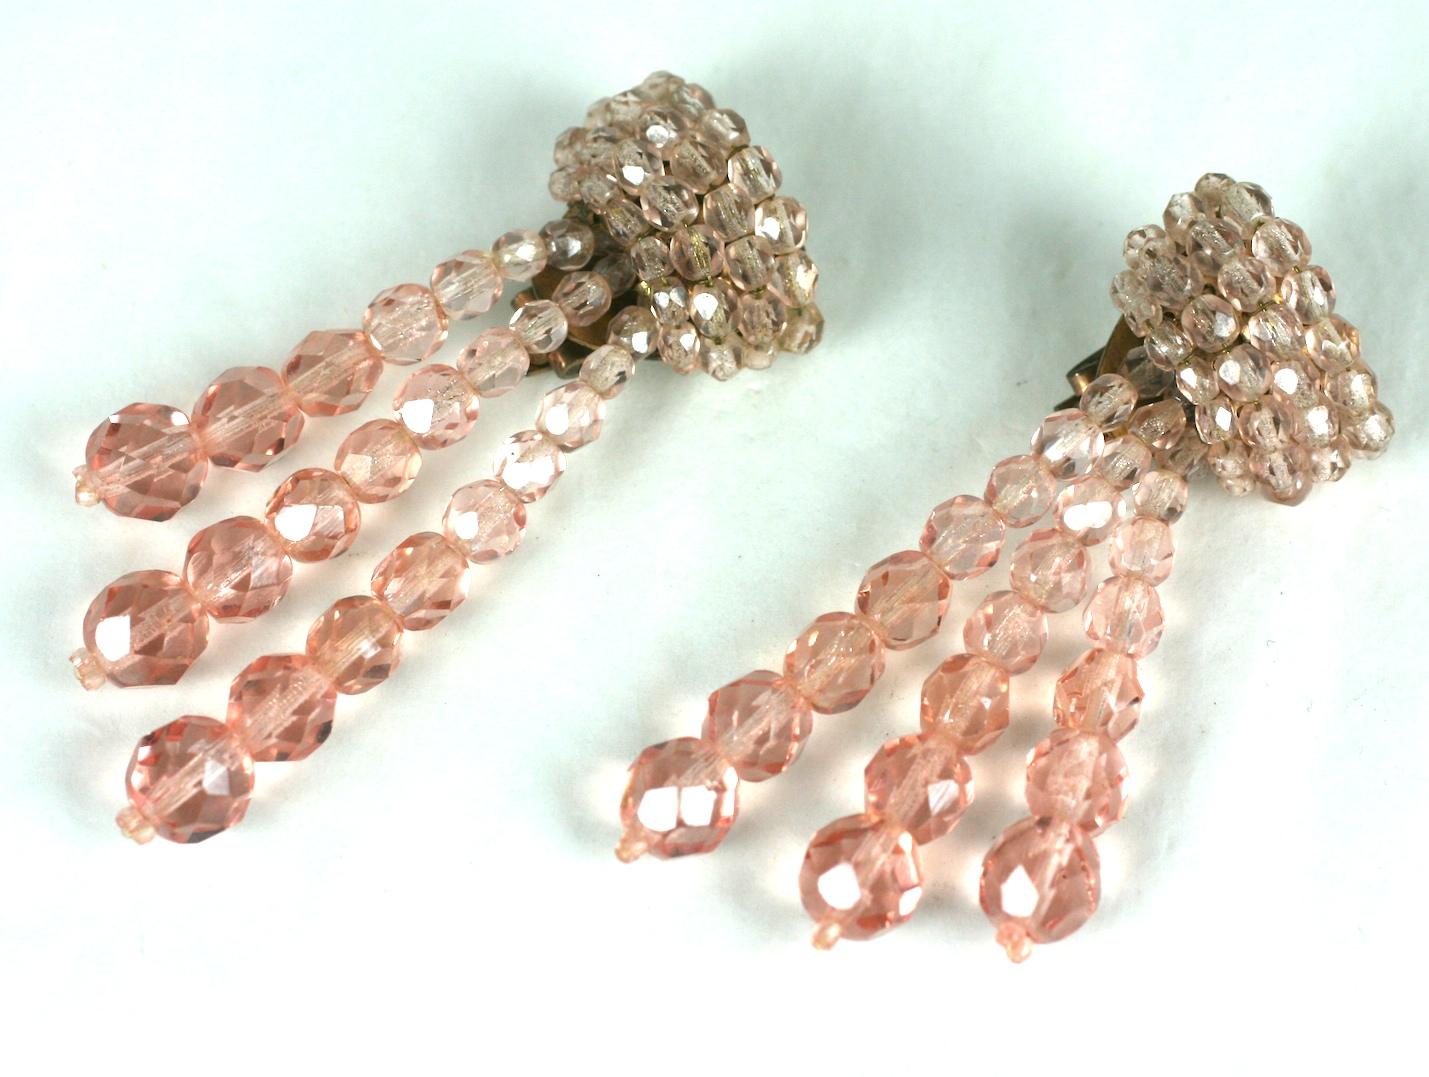 Glamorous Coppola Toppo Ombre Pink Crystal Earrings, Italian from the 1950's. 
Hand strung faceted crystal beads are ombre toned from crystal to pale pink in tassel form.
2.75